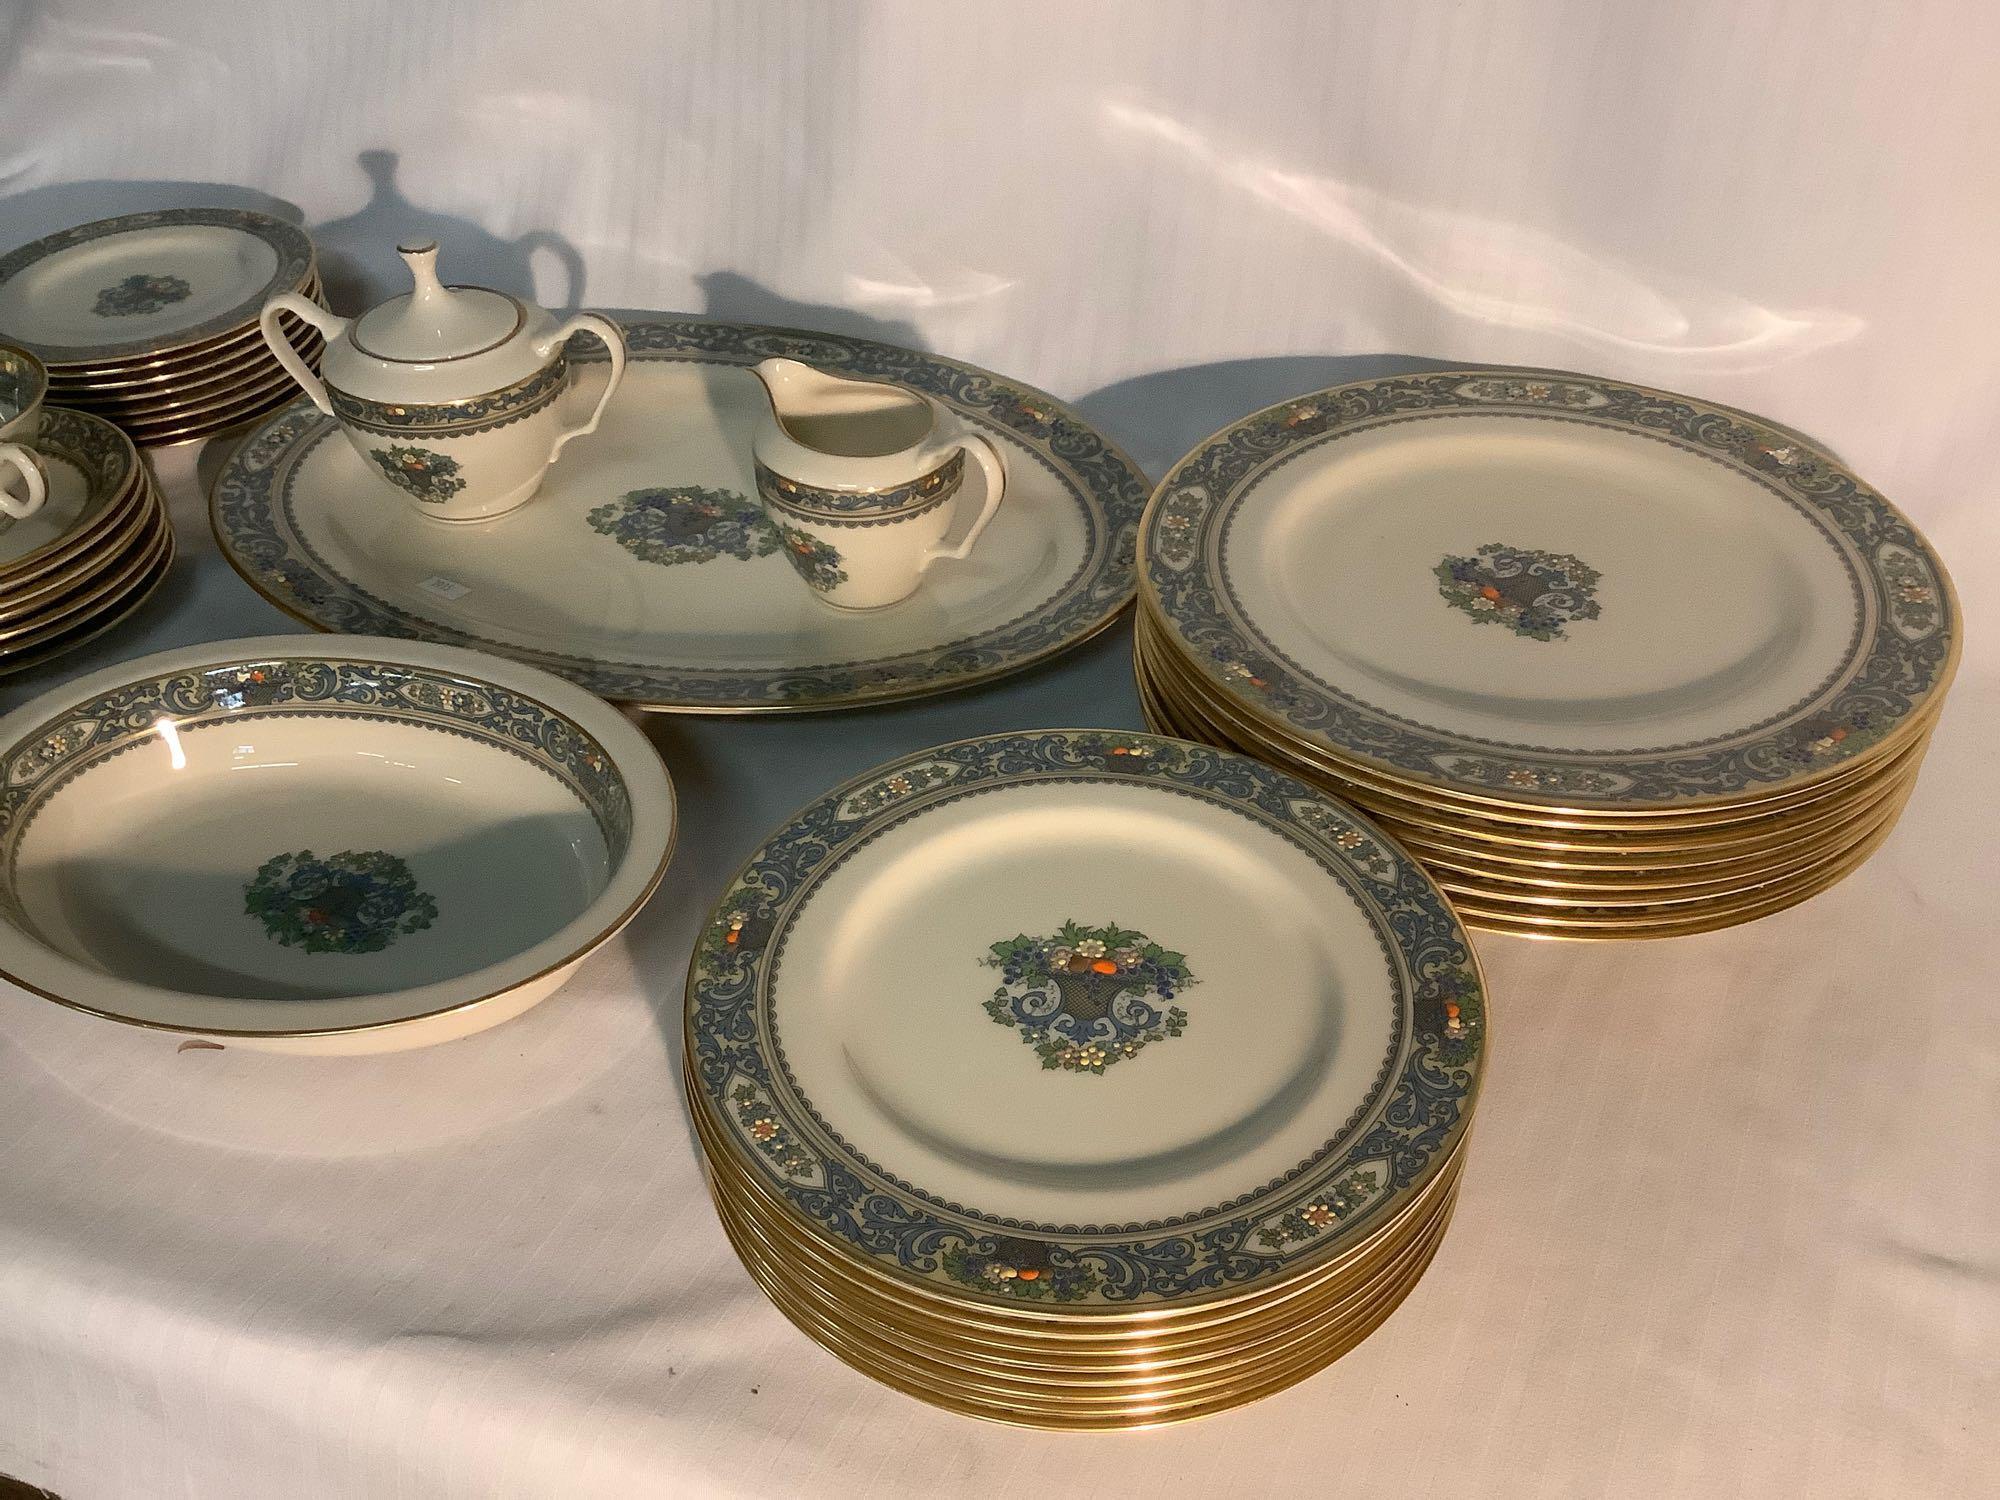 38 pc Lenox - Autumn gold rimmed china set w/ floral designs - see pics service for 8